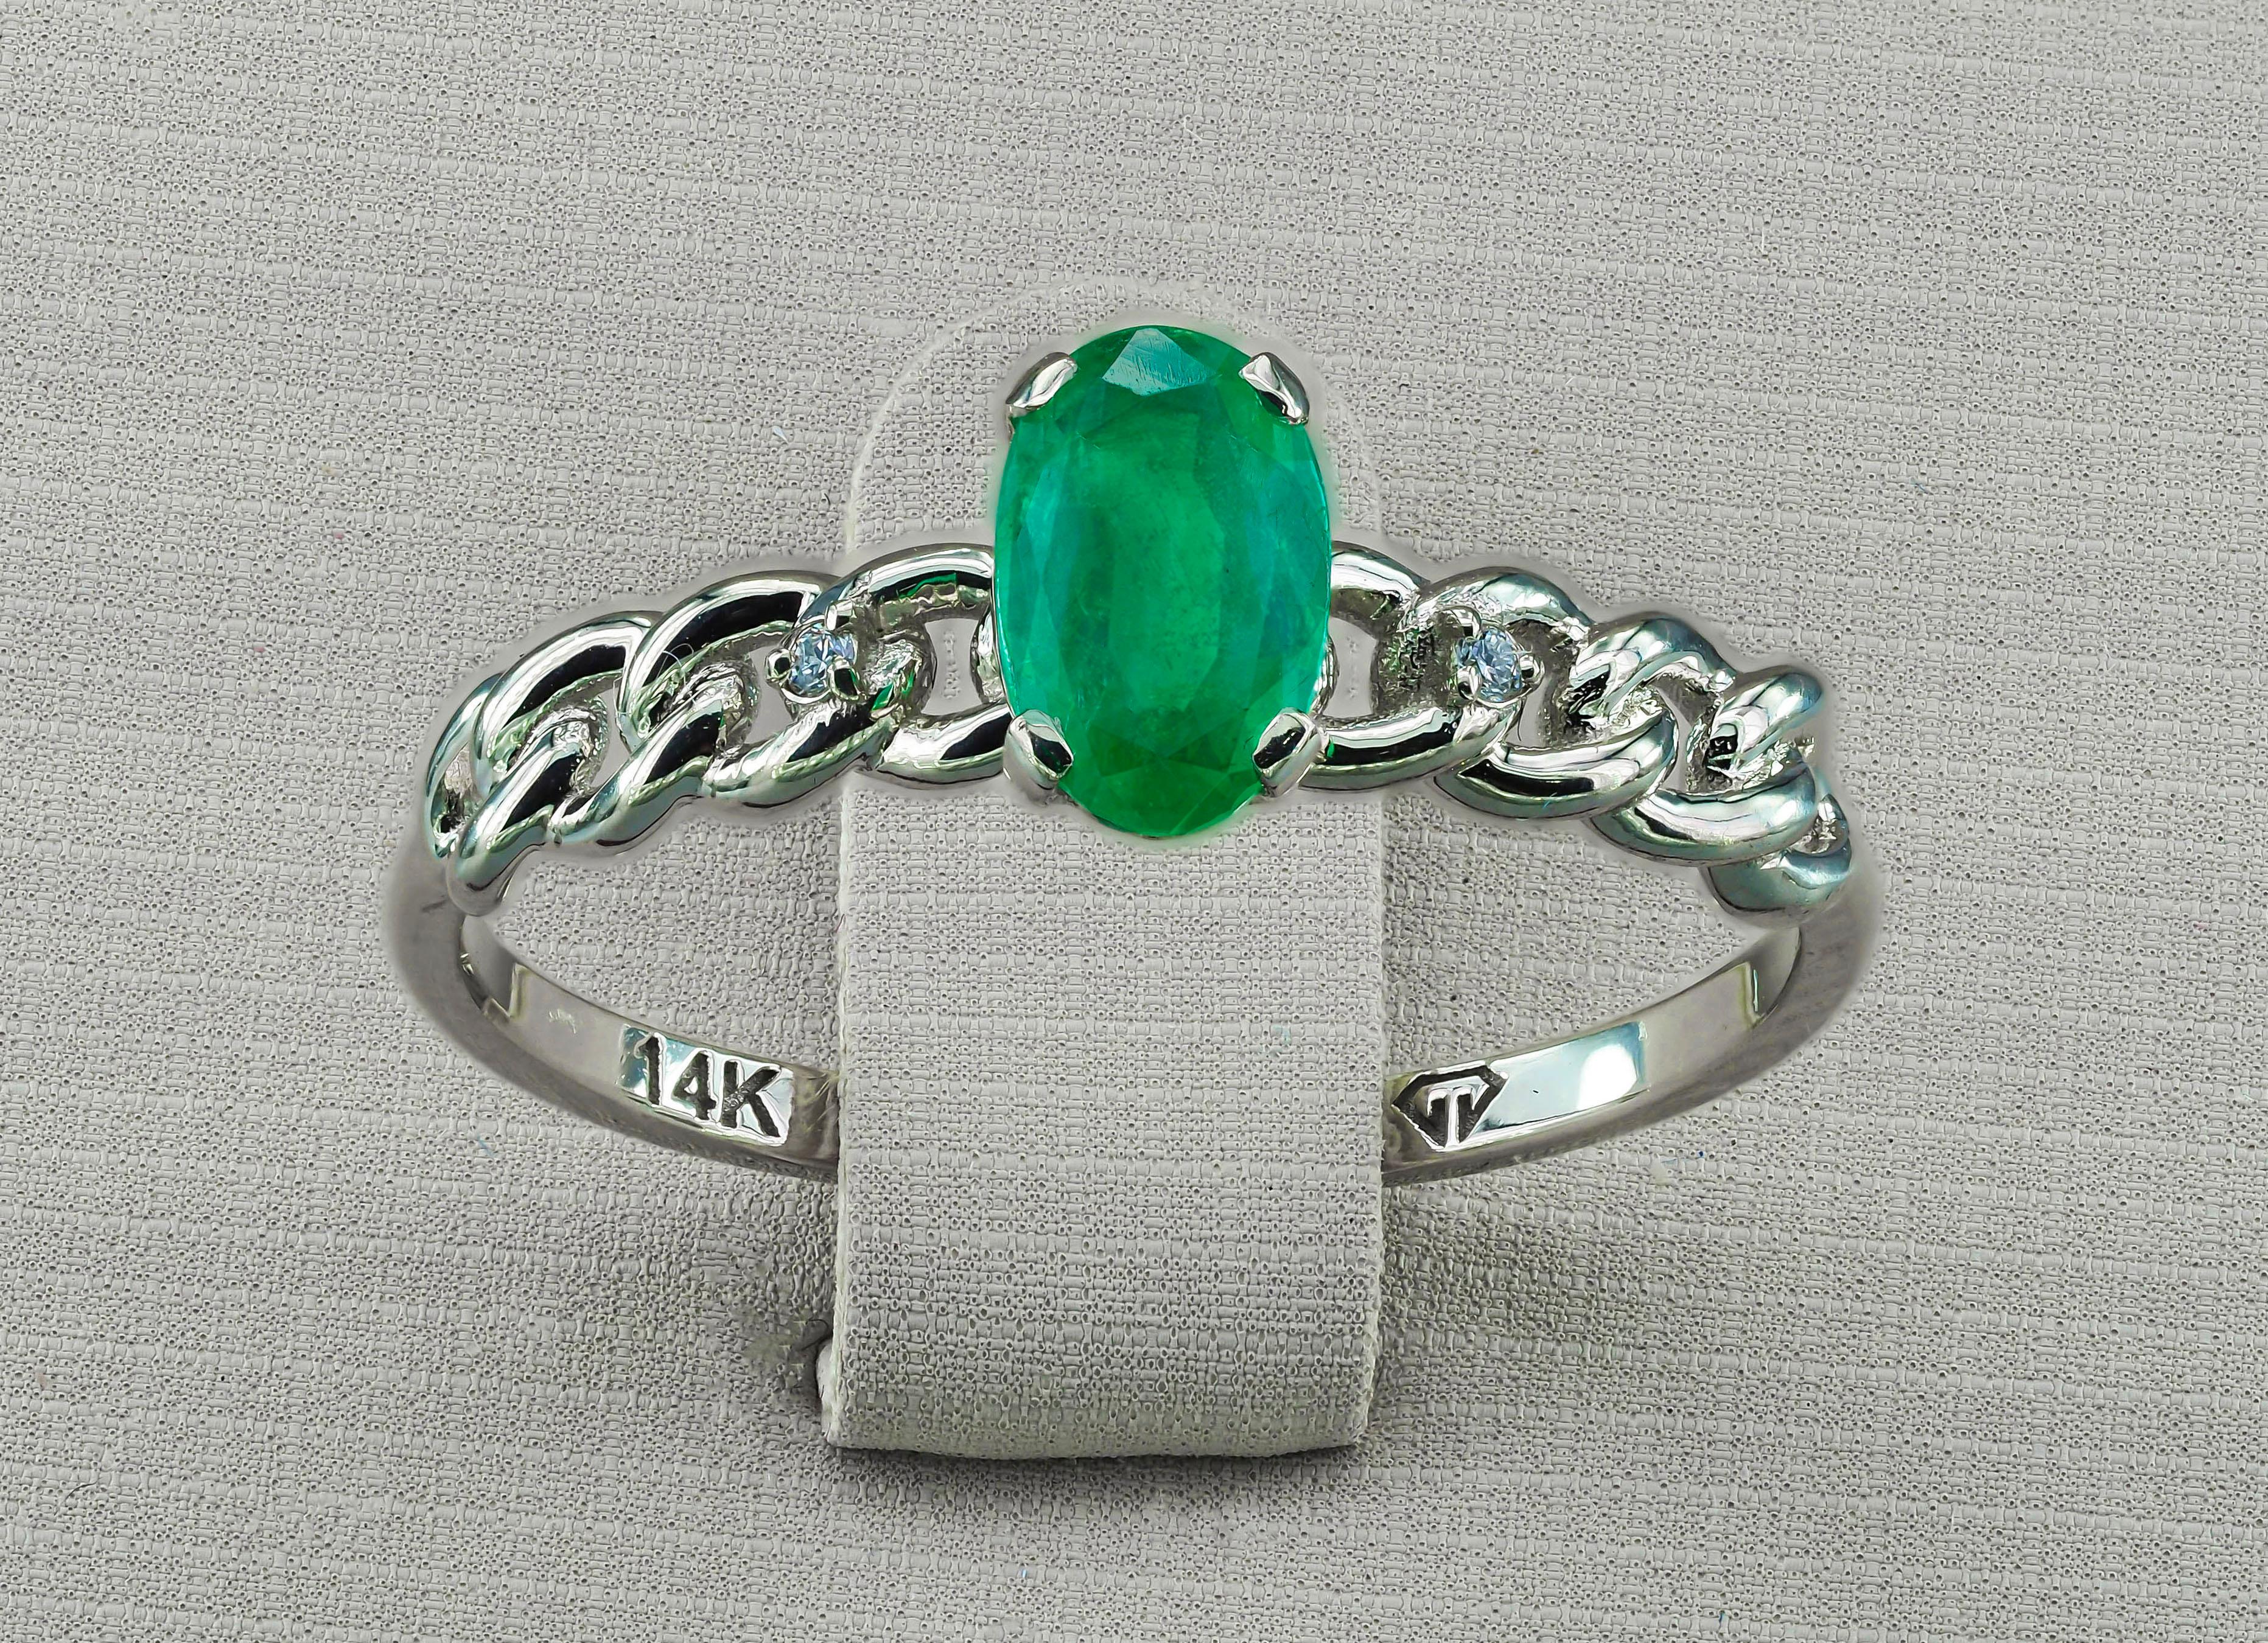 For Sale:  Emerald and diamonds 14k gold ring. Oval emerald gold ring. 2